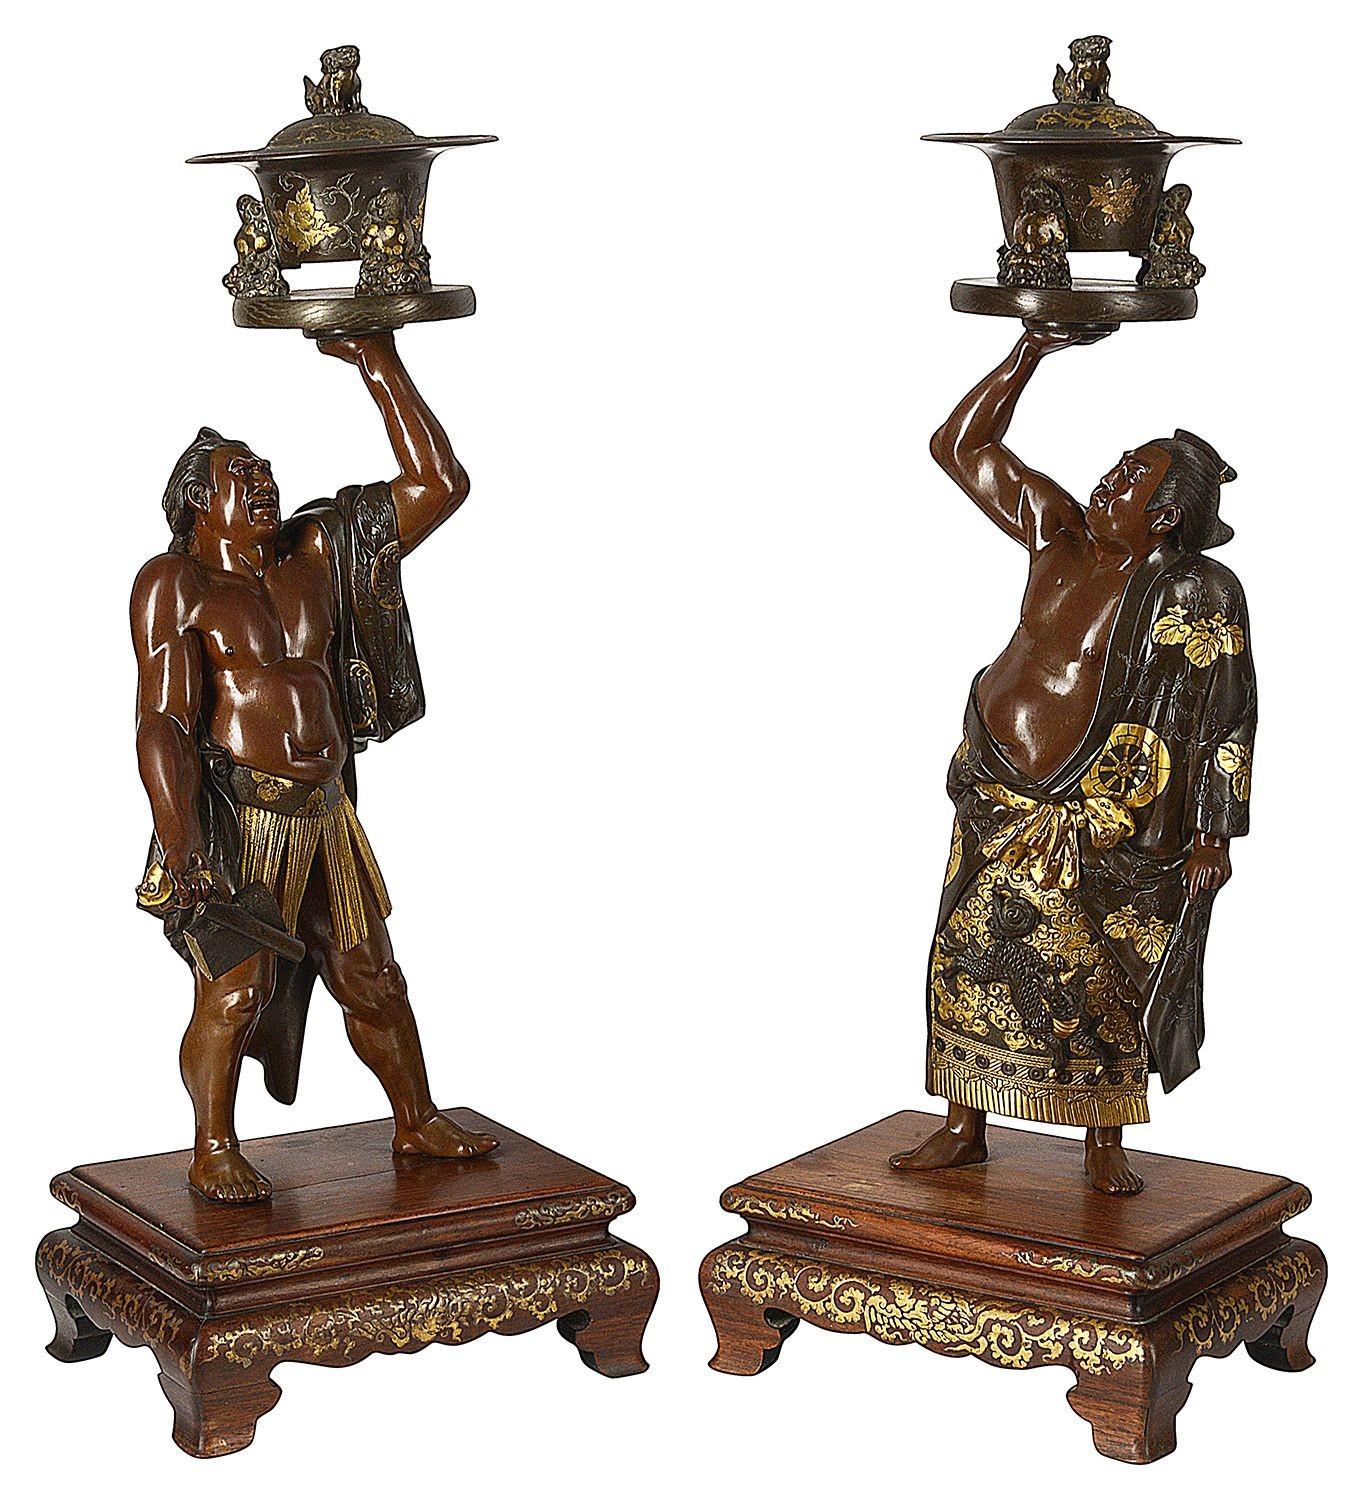 A wonderful, fine quality pair of Japanese Meiji period (1868-1912) Miyao tsukuru signed figures of two Sumo wrestlers, each bare chested with kimonos thrown over their shoulders, holding aloft cyclindrical covered censers, one wrestler wearing a